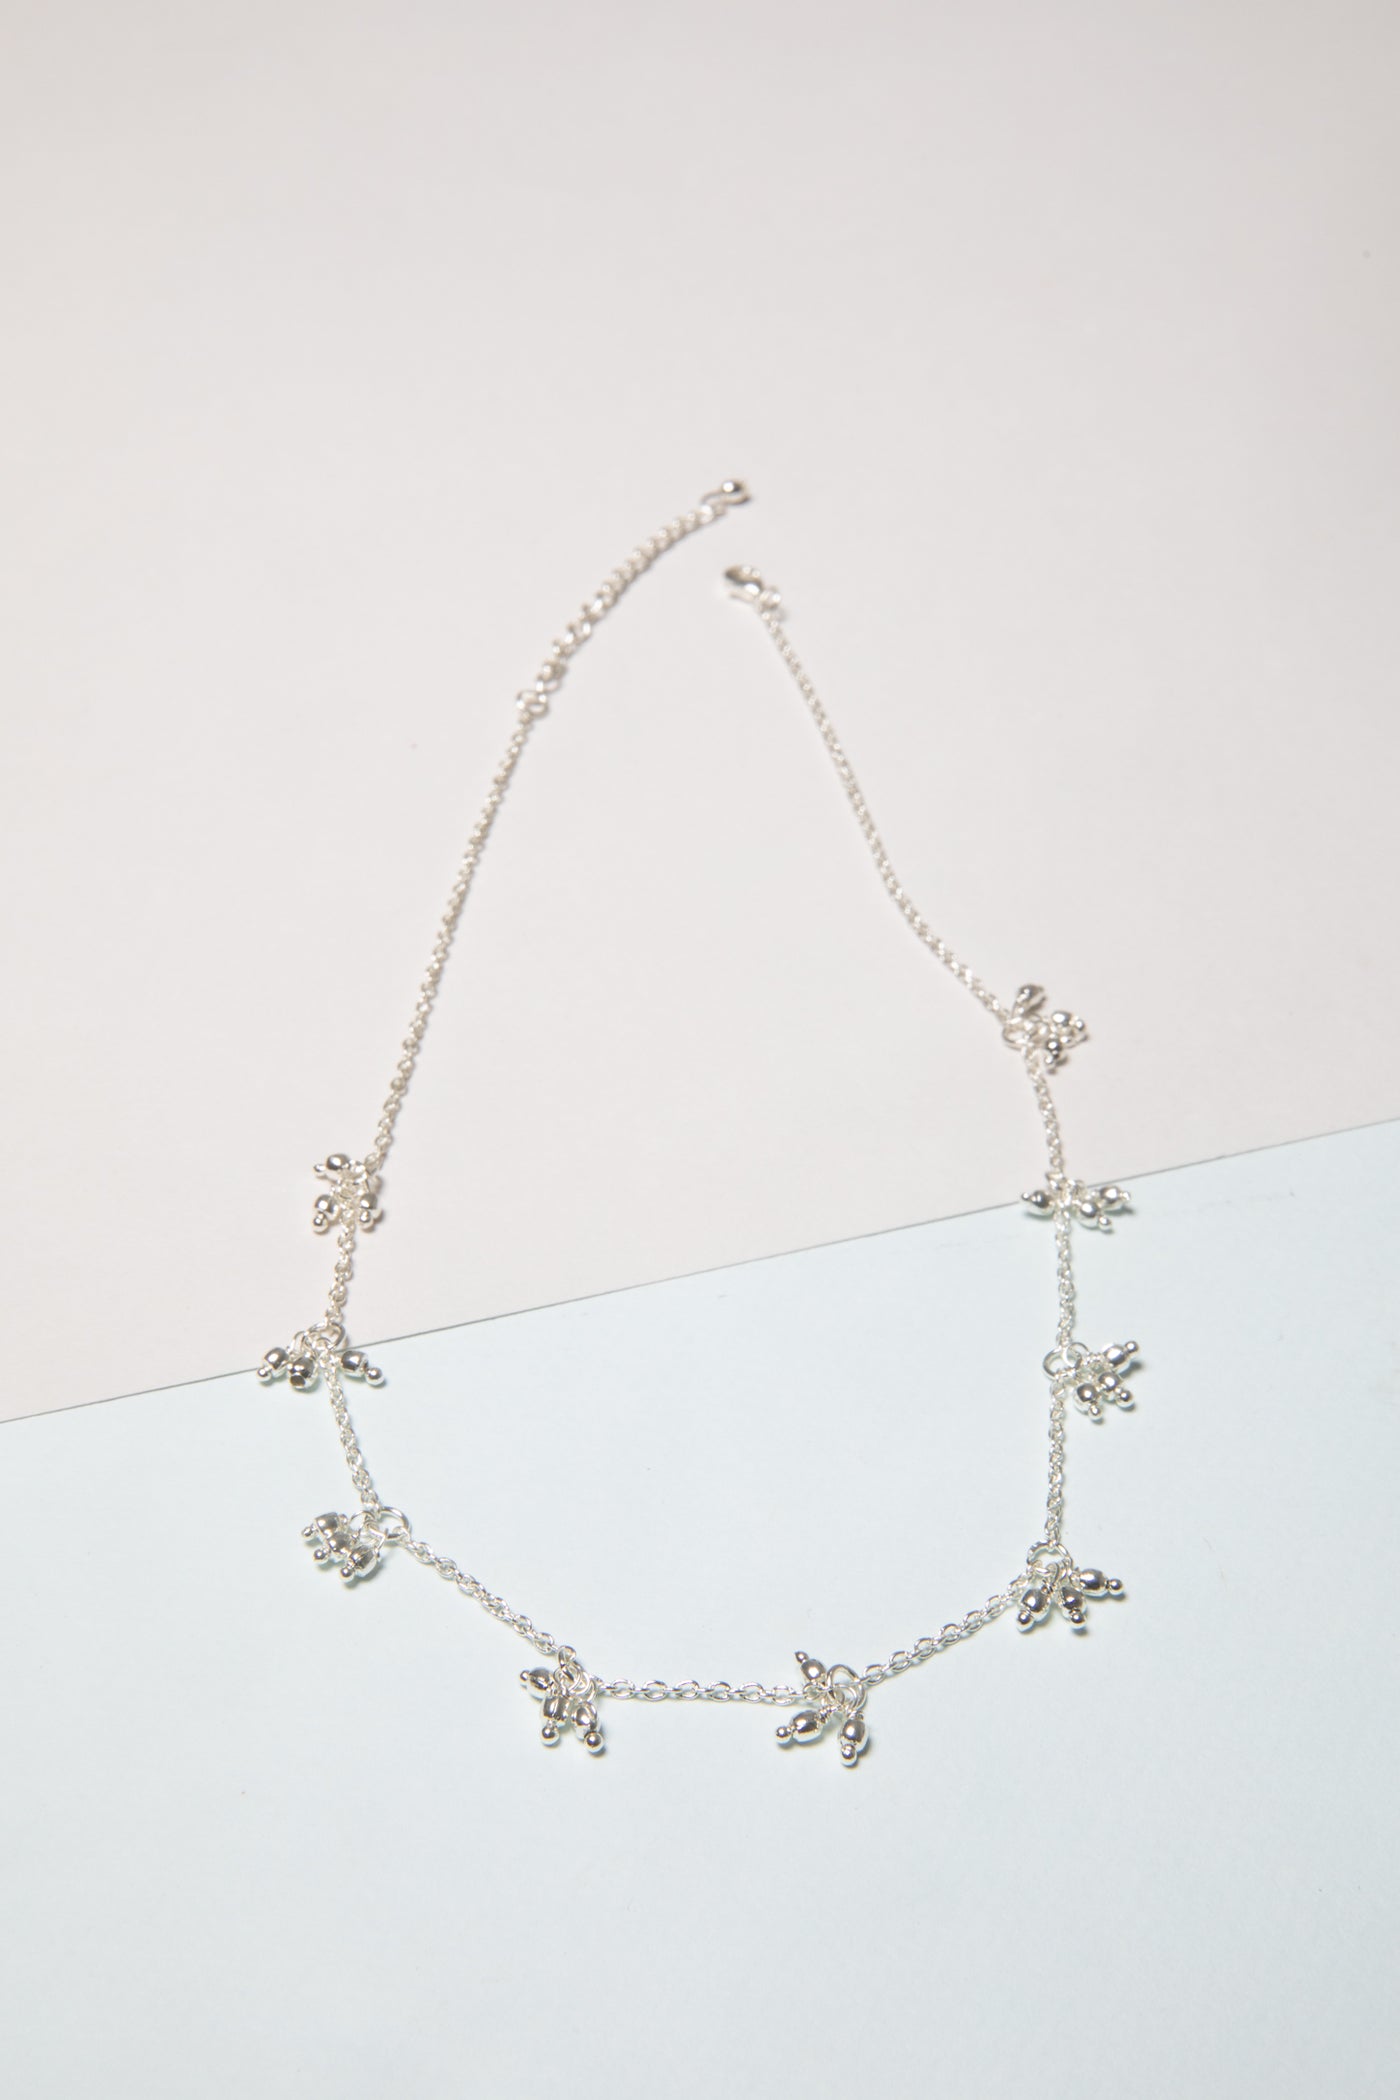 Silvery Charms Chain Necklace